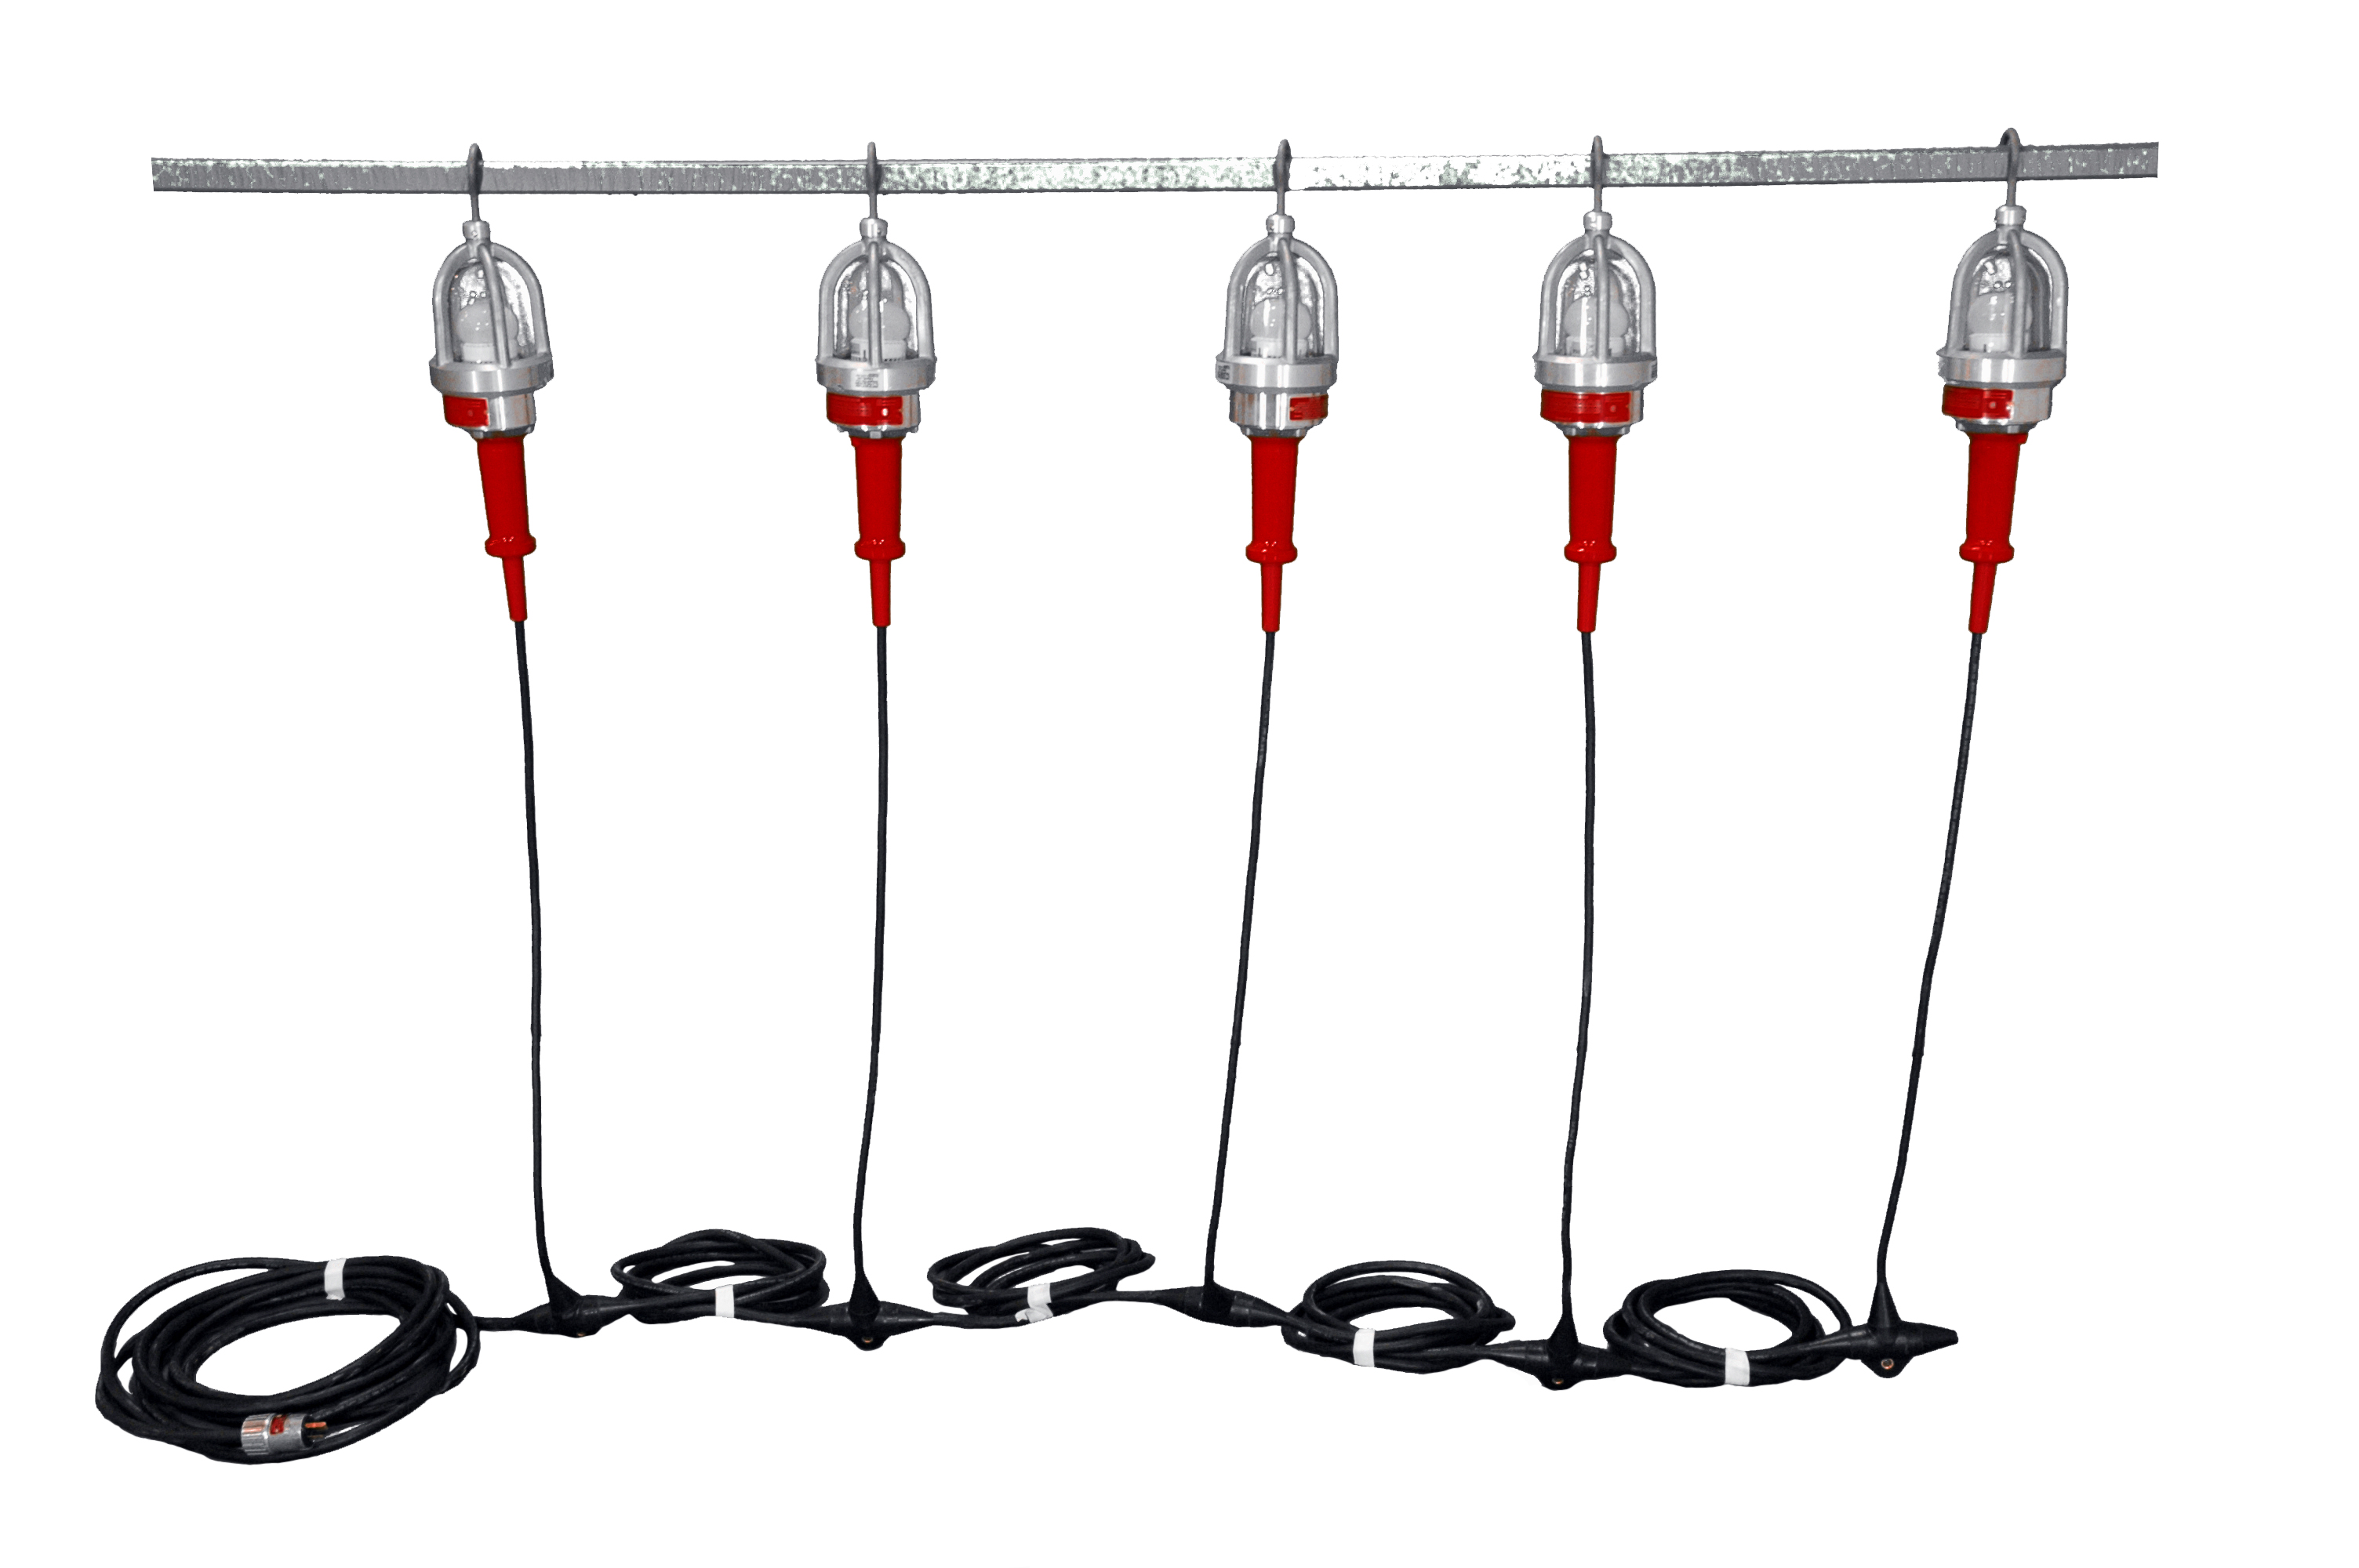 Explosion Proof LED String Light Set with 10 Drop Lights for use in Hazardous Locations